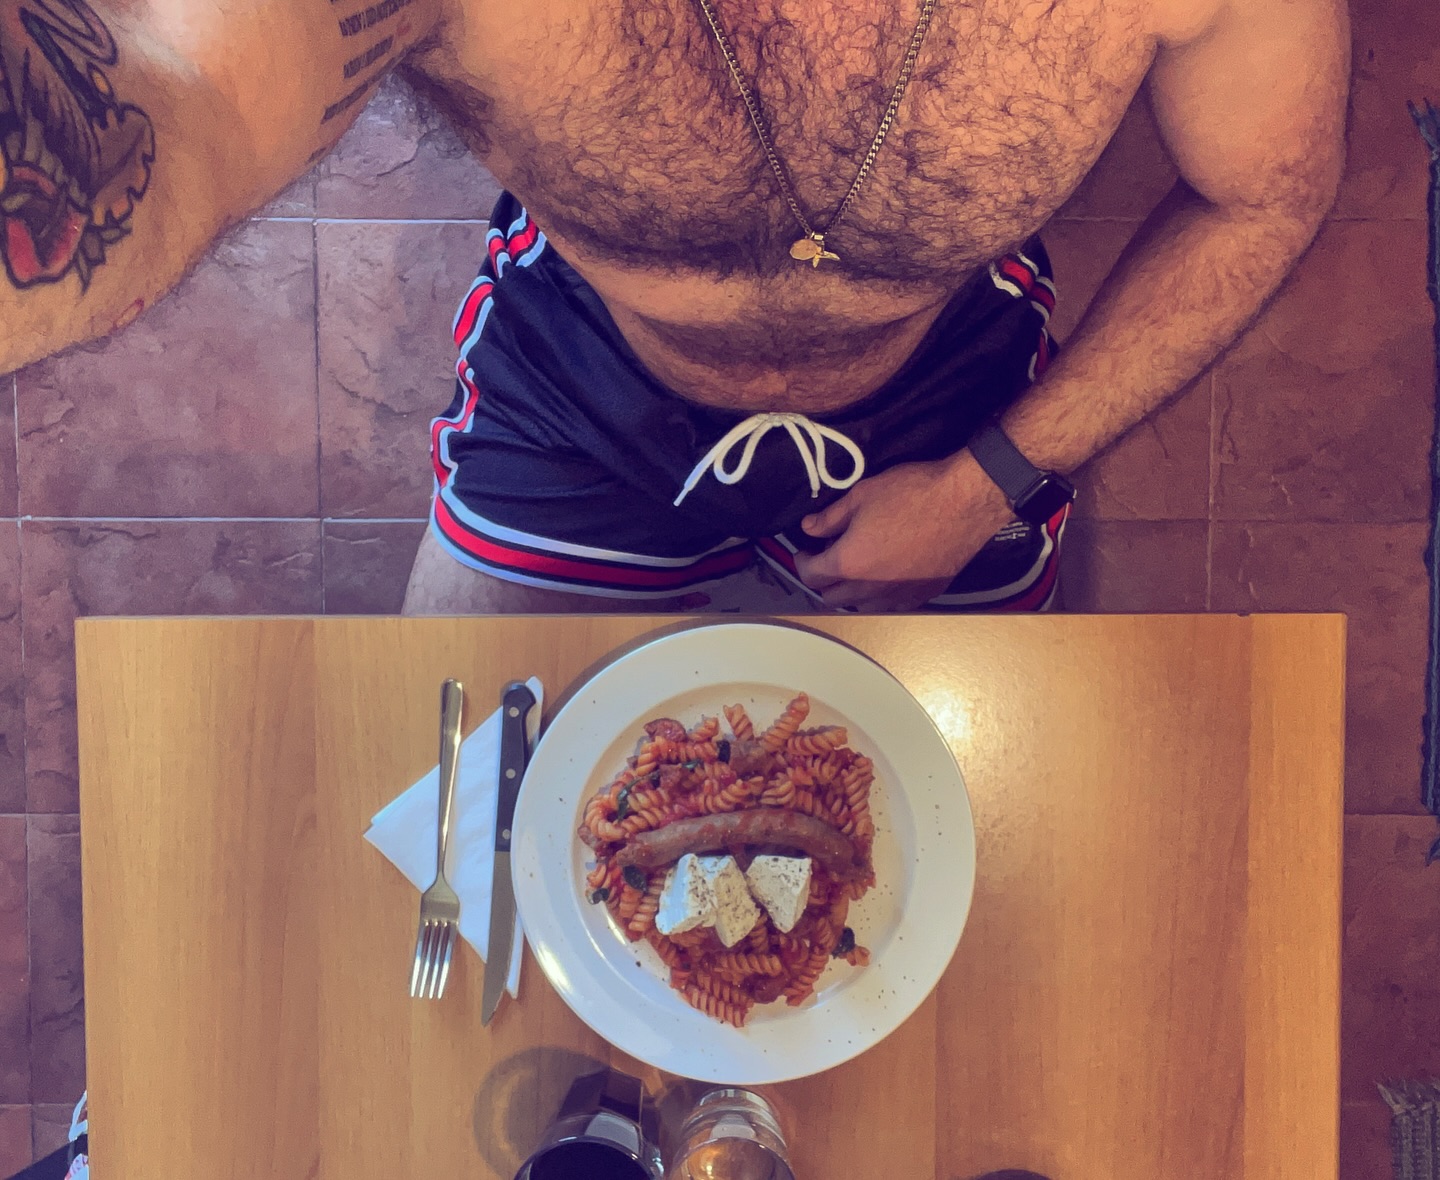 🐻🍽 Lunch time 😻🍴Fusilli al sugo con salsiccia e ricotta #me #pasta #sausage #ricotta #foodlovers #amazingfood #tattoo #tasty #foodpictures  #delicious #foodgasm  #hairyhunk #cool #gains #protein  #muscle #hairygay #hairylegs #instabear #gaystagram #sexyundie #briefs #beardlove #gaylike #woof #bearsofinstagram